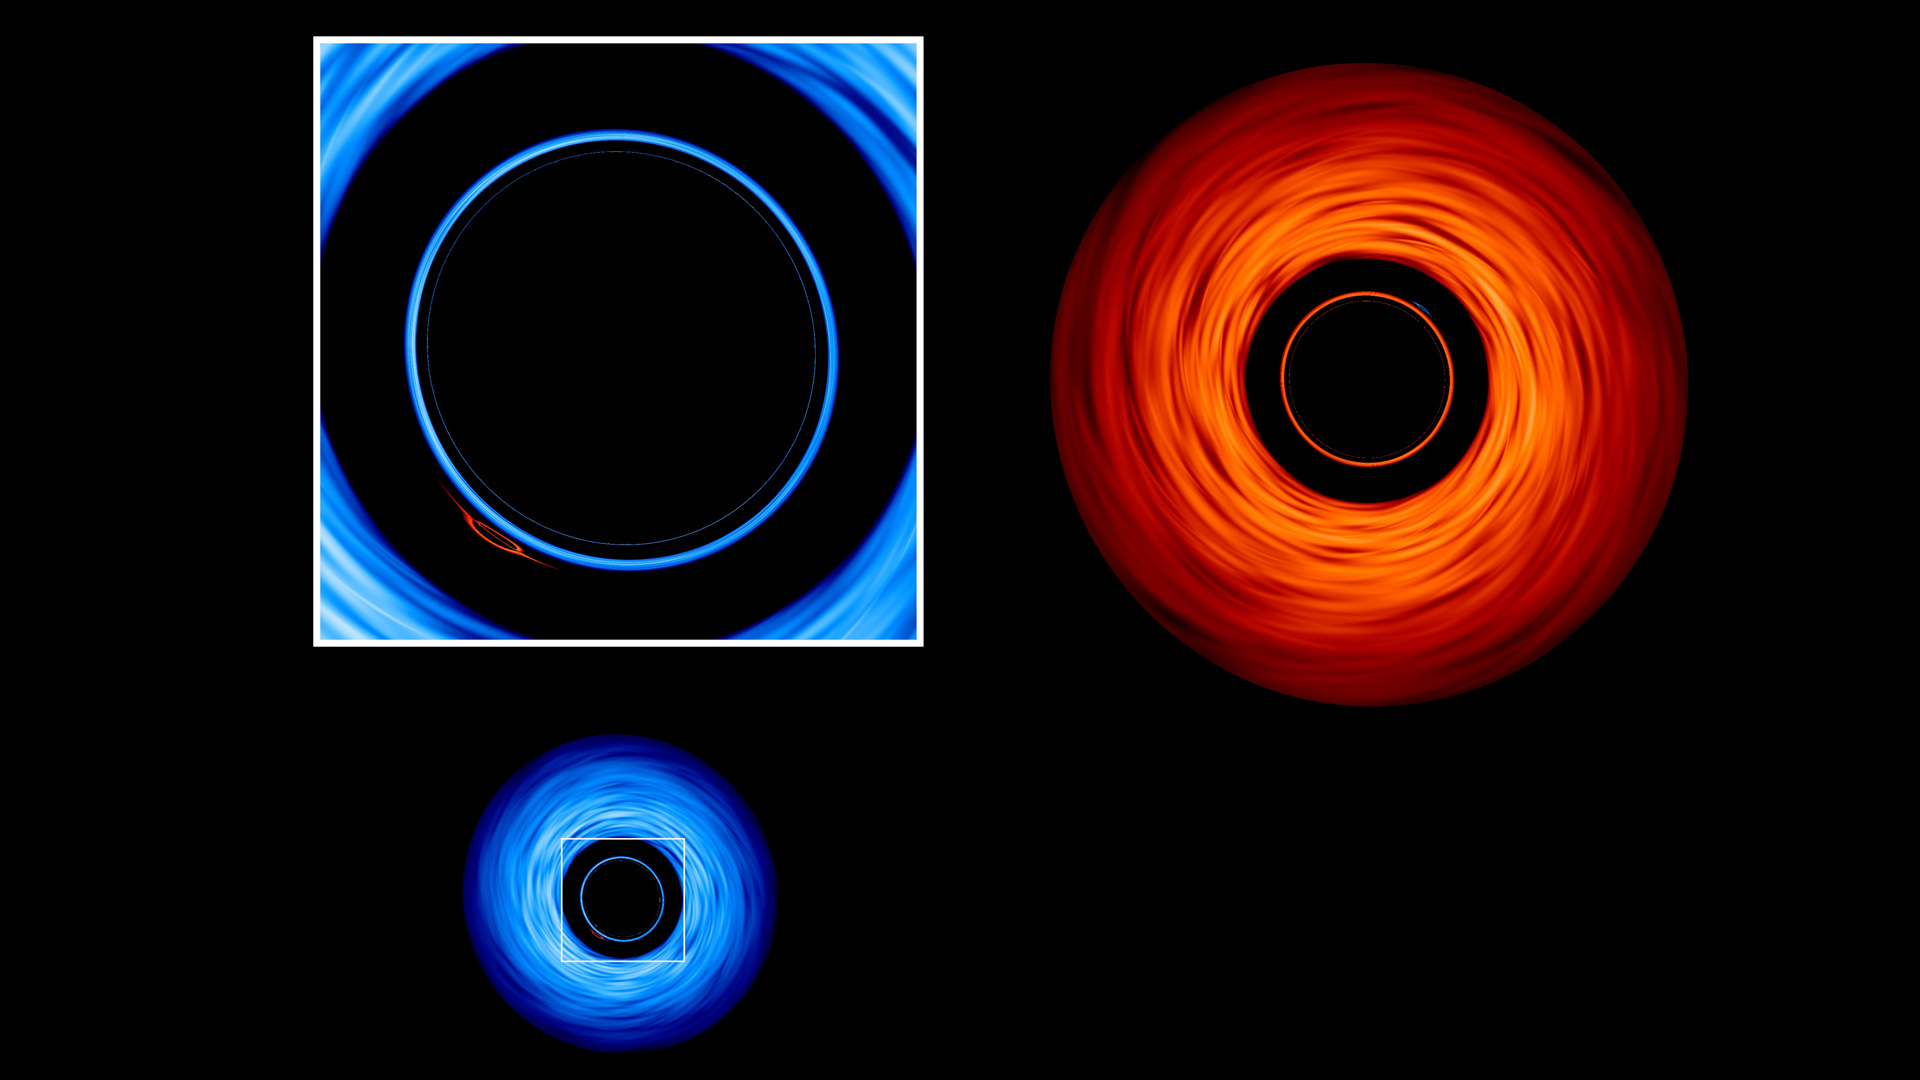 Detailed view of a secondary image of the larger black hole formed by its smaller companion